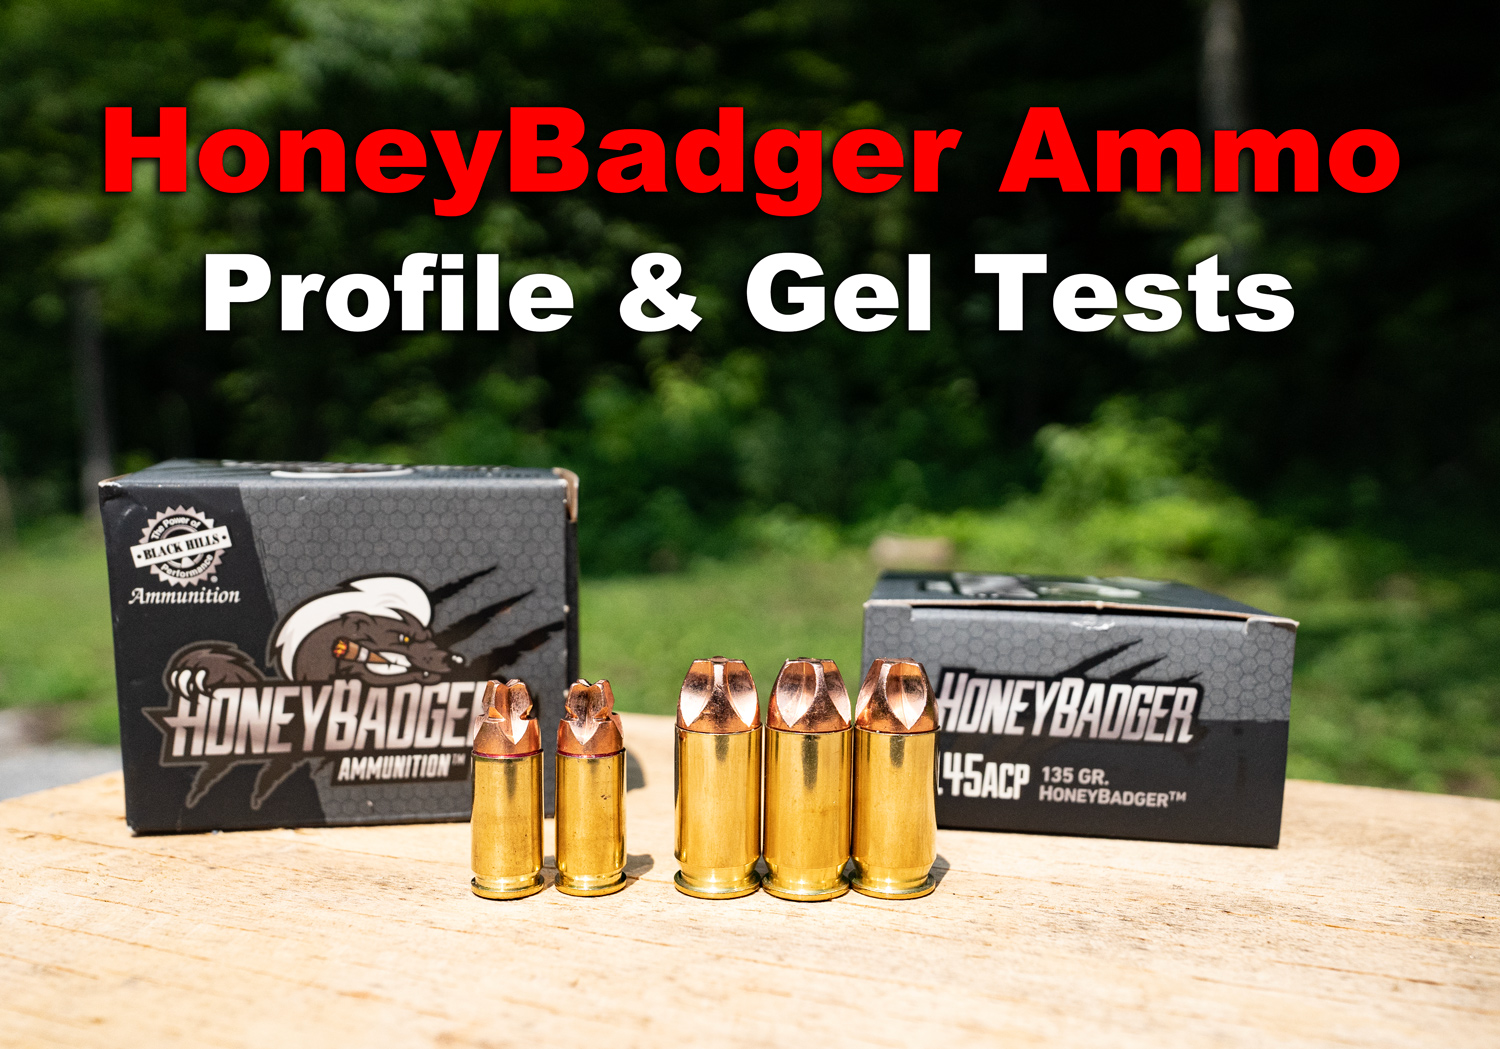 Honeybadger 9mm and 45 ACP ammo at the range